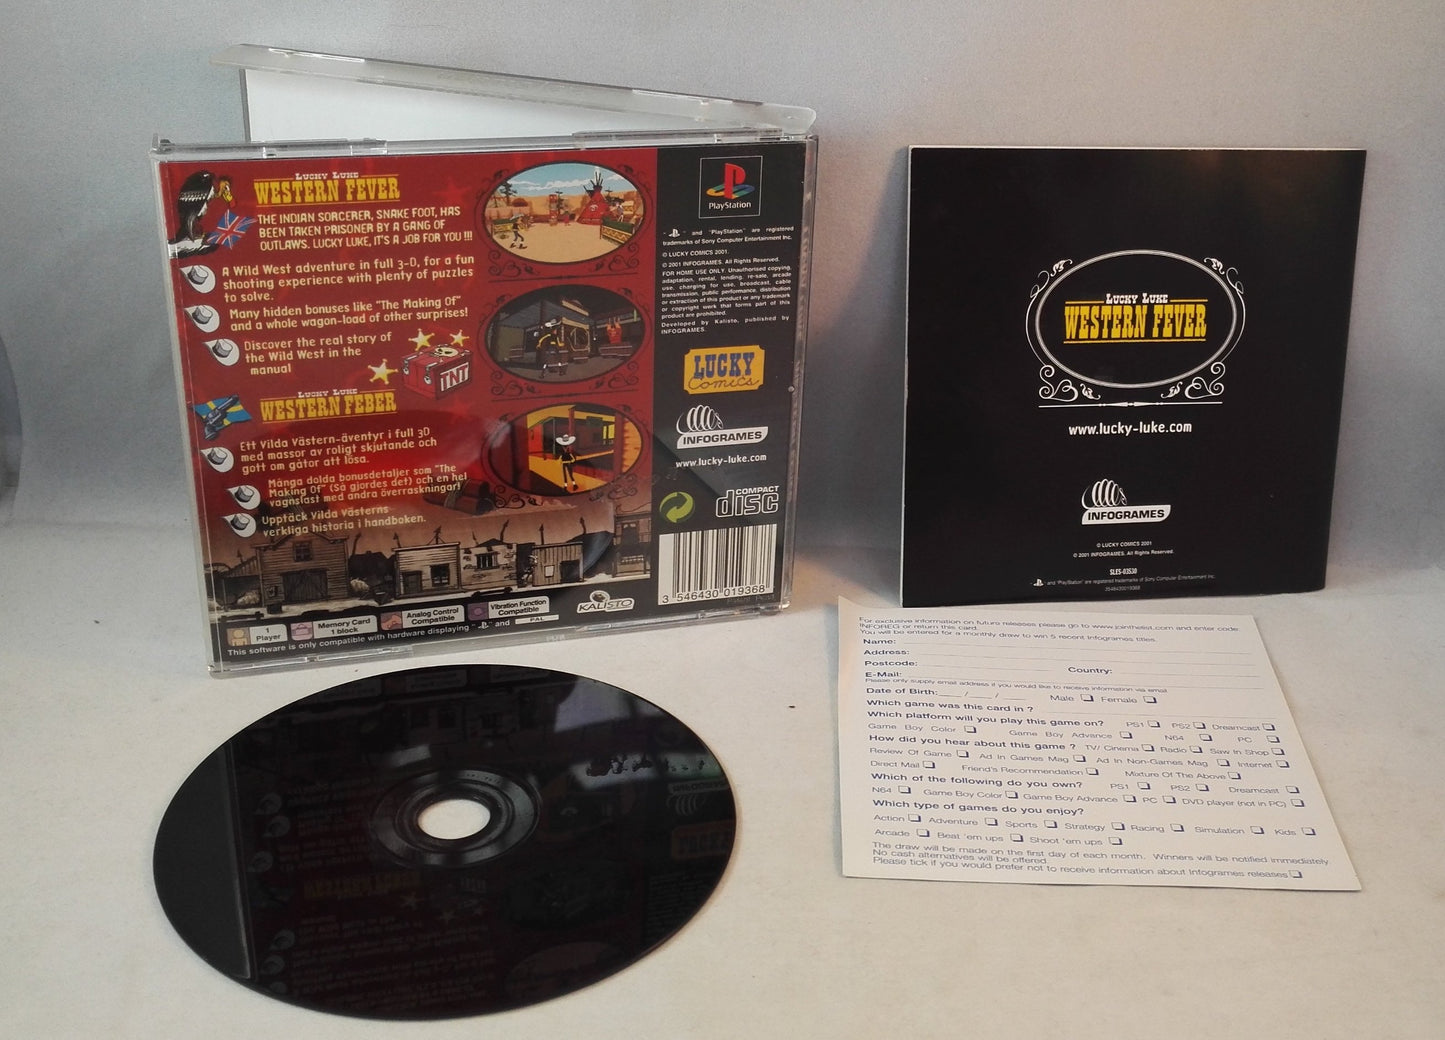 Lucky Luke Western Fever PS1 (Sony Playstation 1) Black Label game